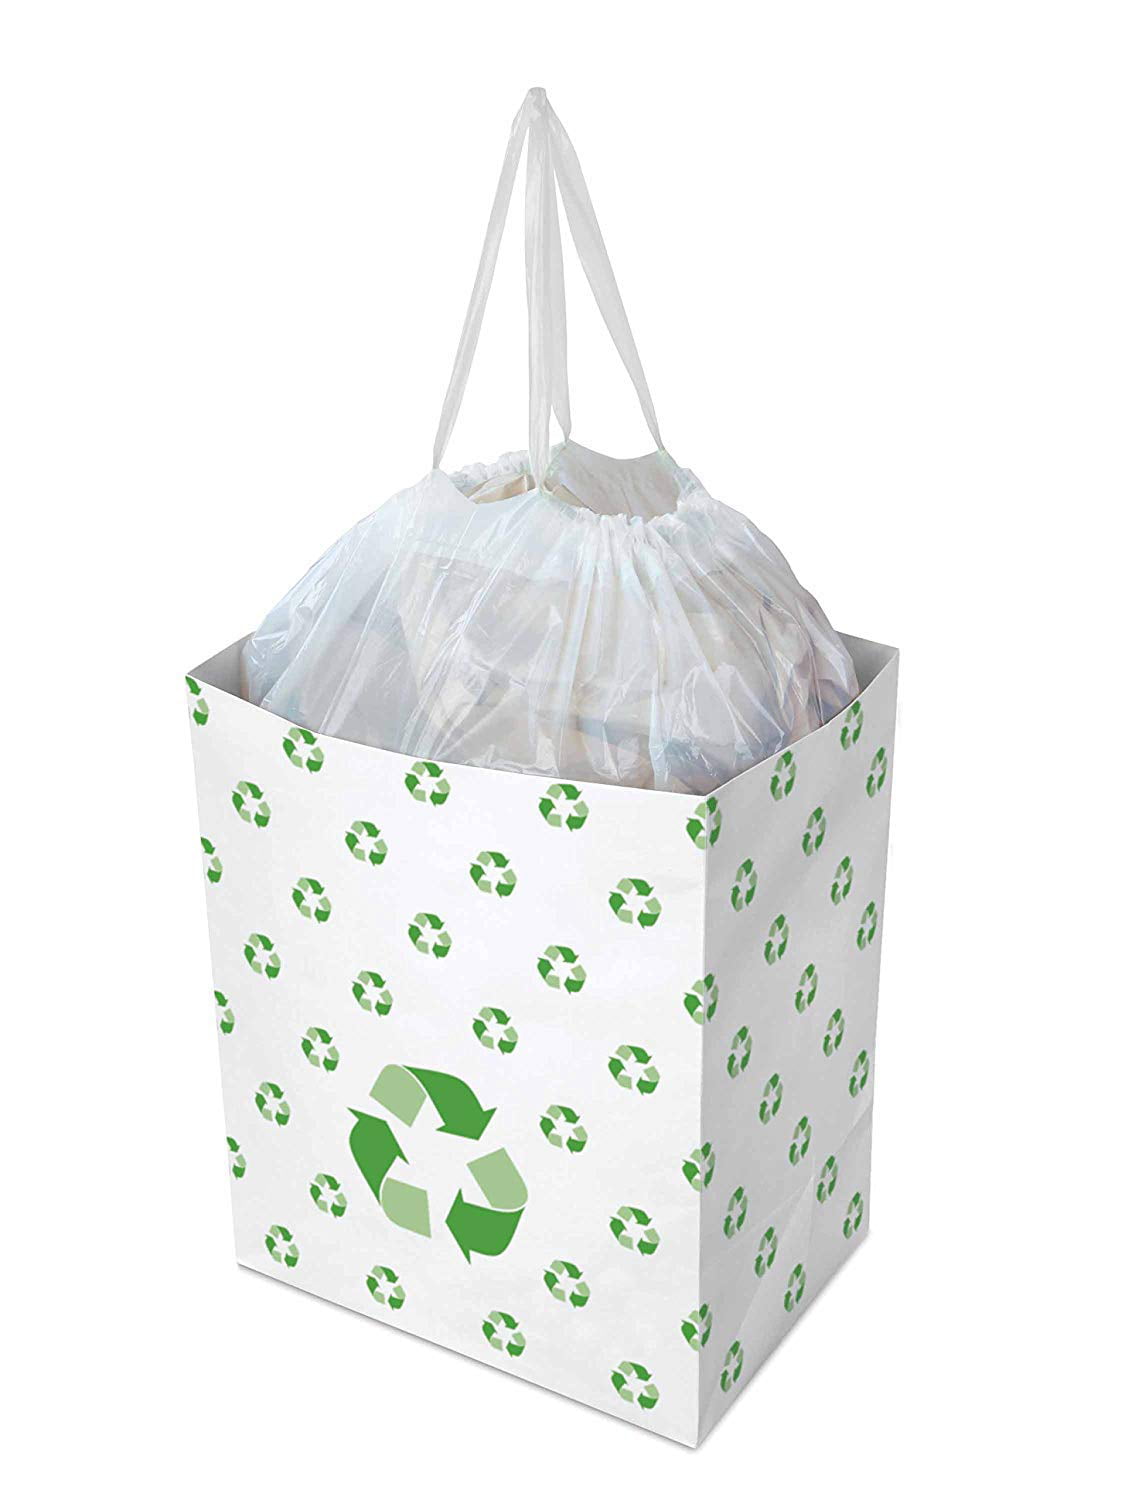 Clean Cubes 13 Gallon Trash Cans & Recycle Bins for Sanitary Garbage  Disposal. Disposable Containers for